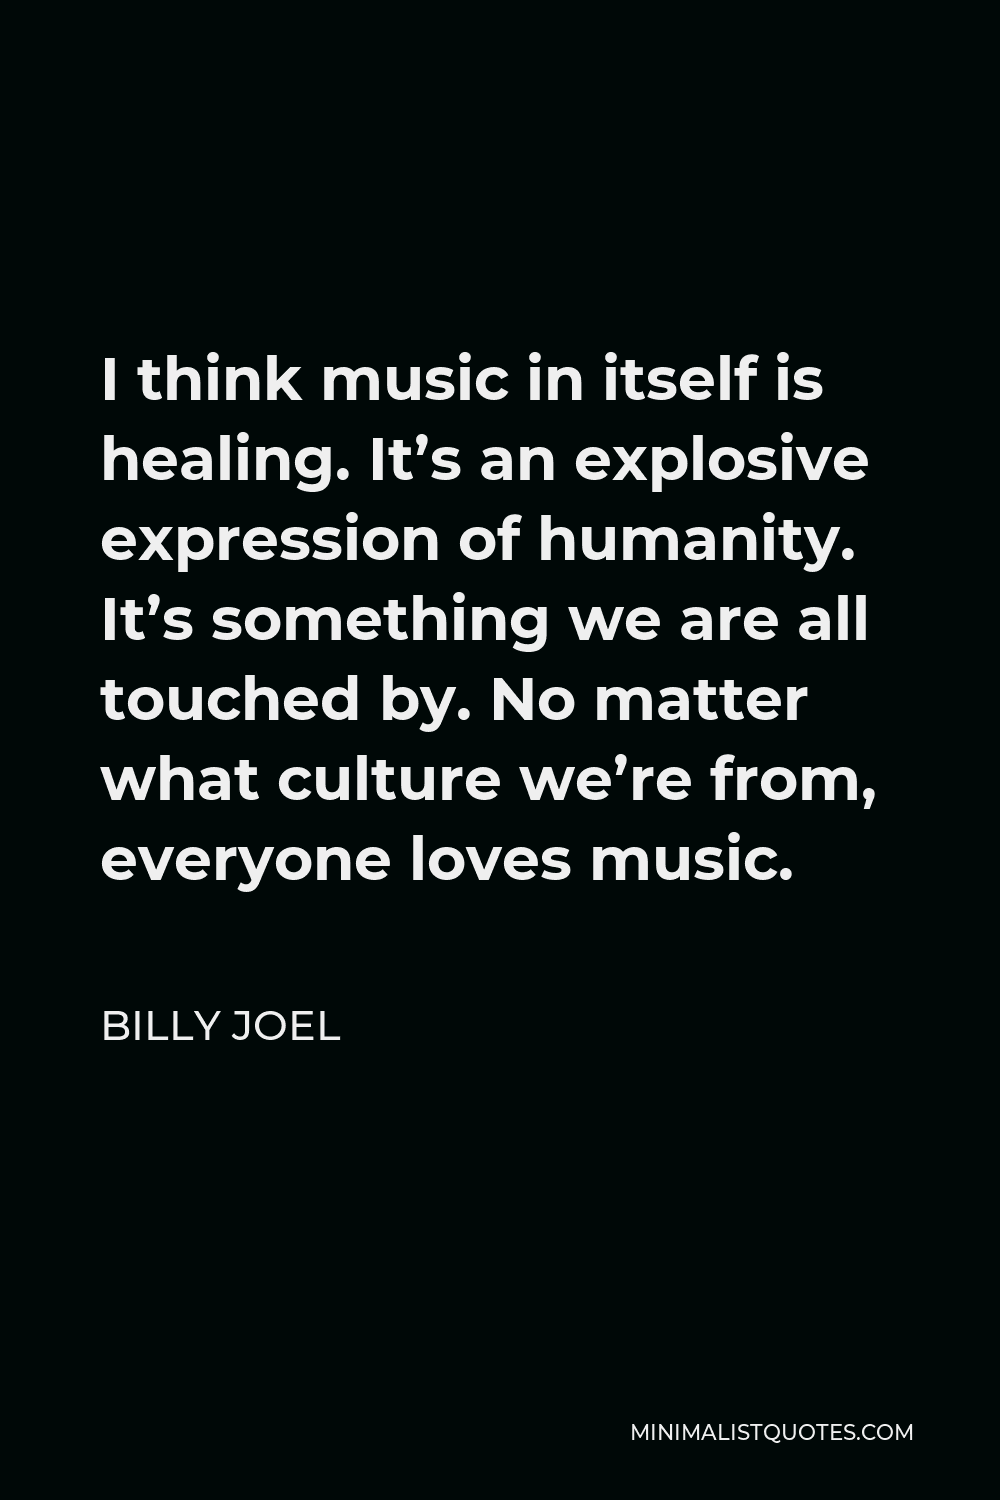 Billy Joel Quote - I think music in itself is healing. It’s an explosive expression of humanity. It’s something we are all touched by. No matter what culture we’re from, everyone loves music.